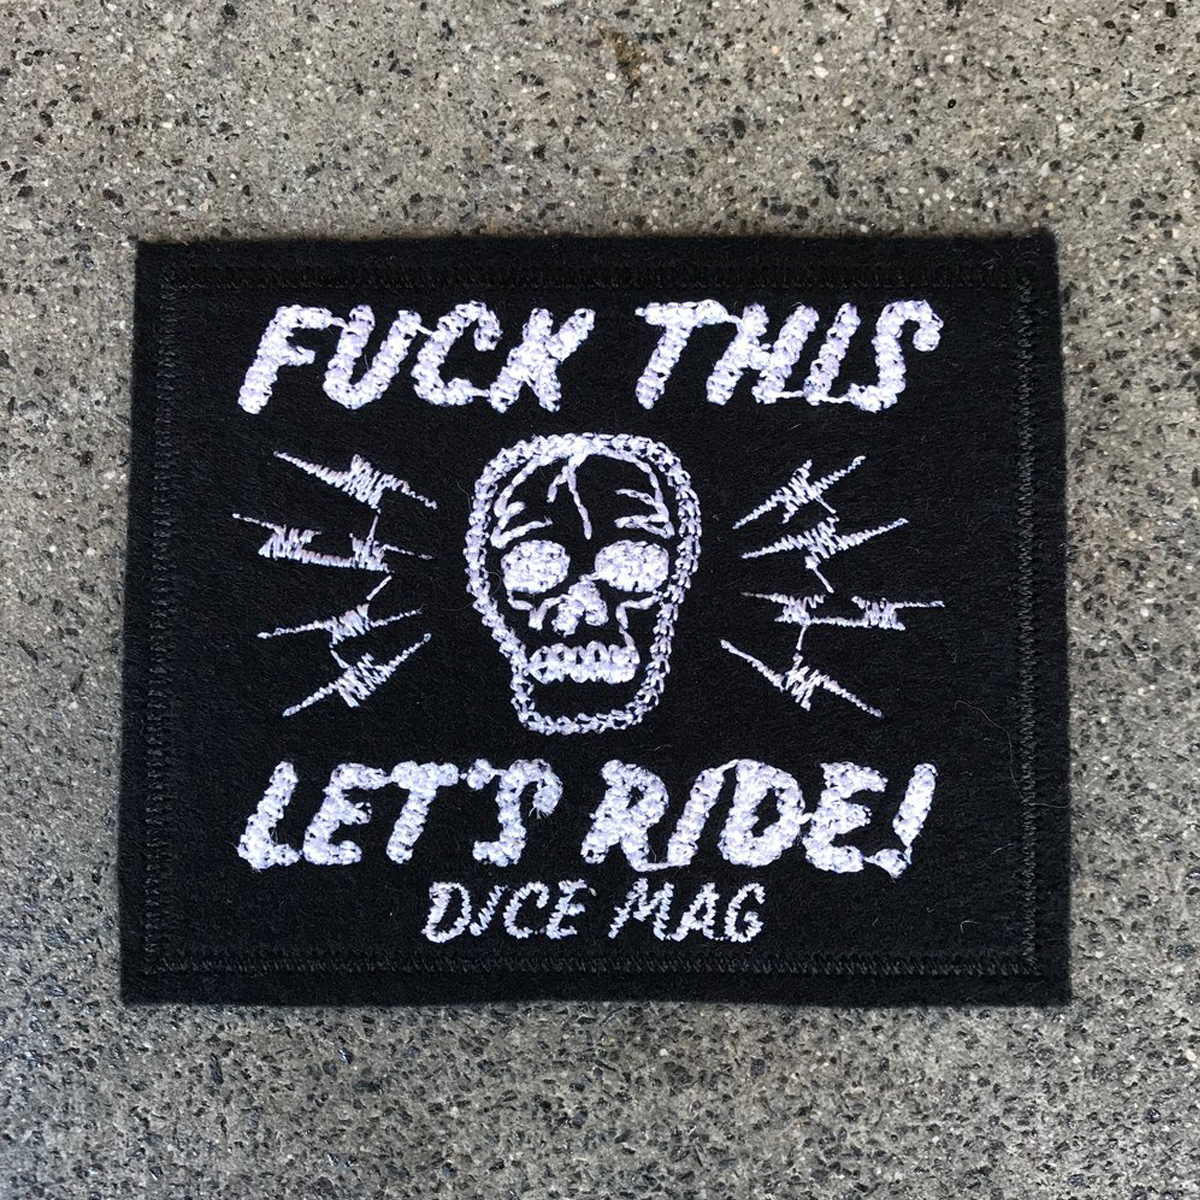 FTLR Skull Chain Stitched Patch — DicE Magazine